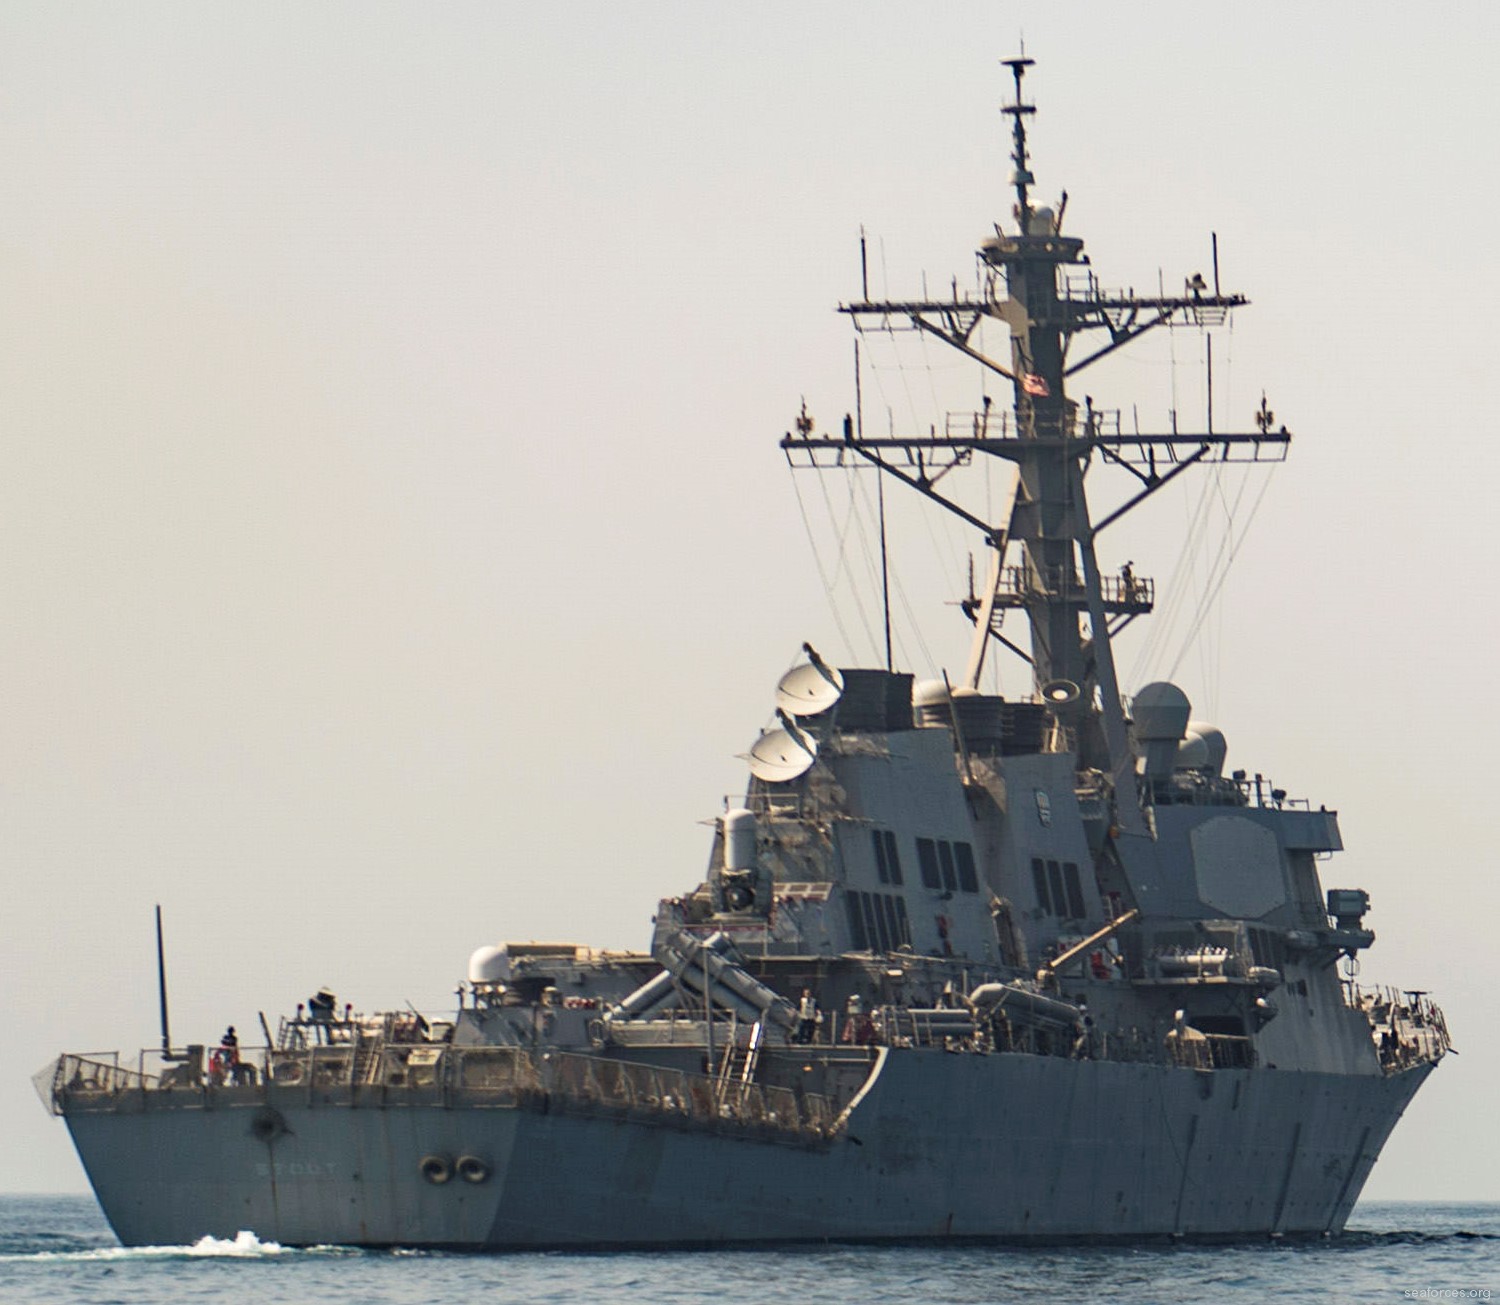 ddg-55 uss stout guided missile destroyer us navy 13